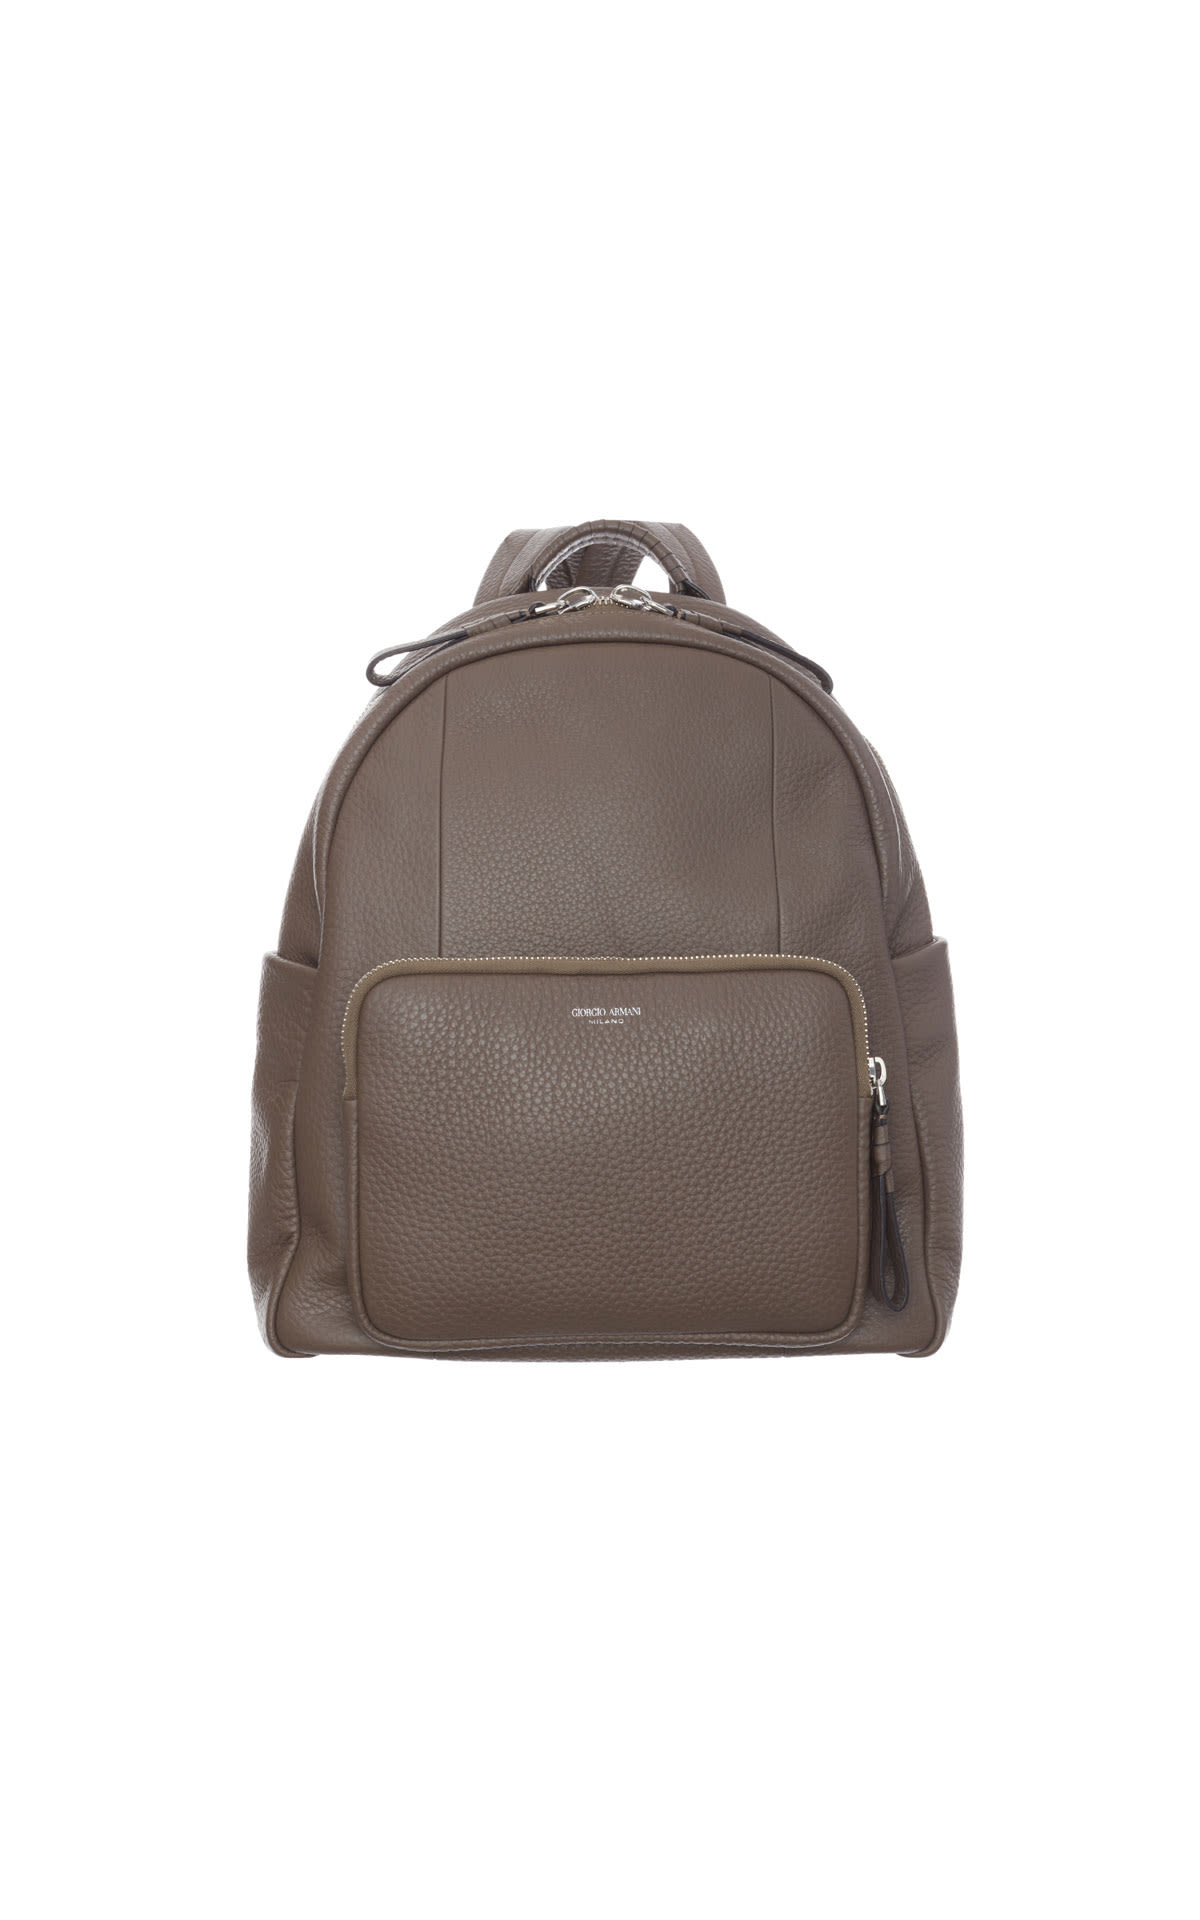 Armani Grainy leather backpack from Bicester Village